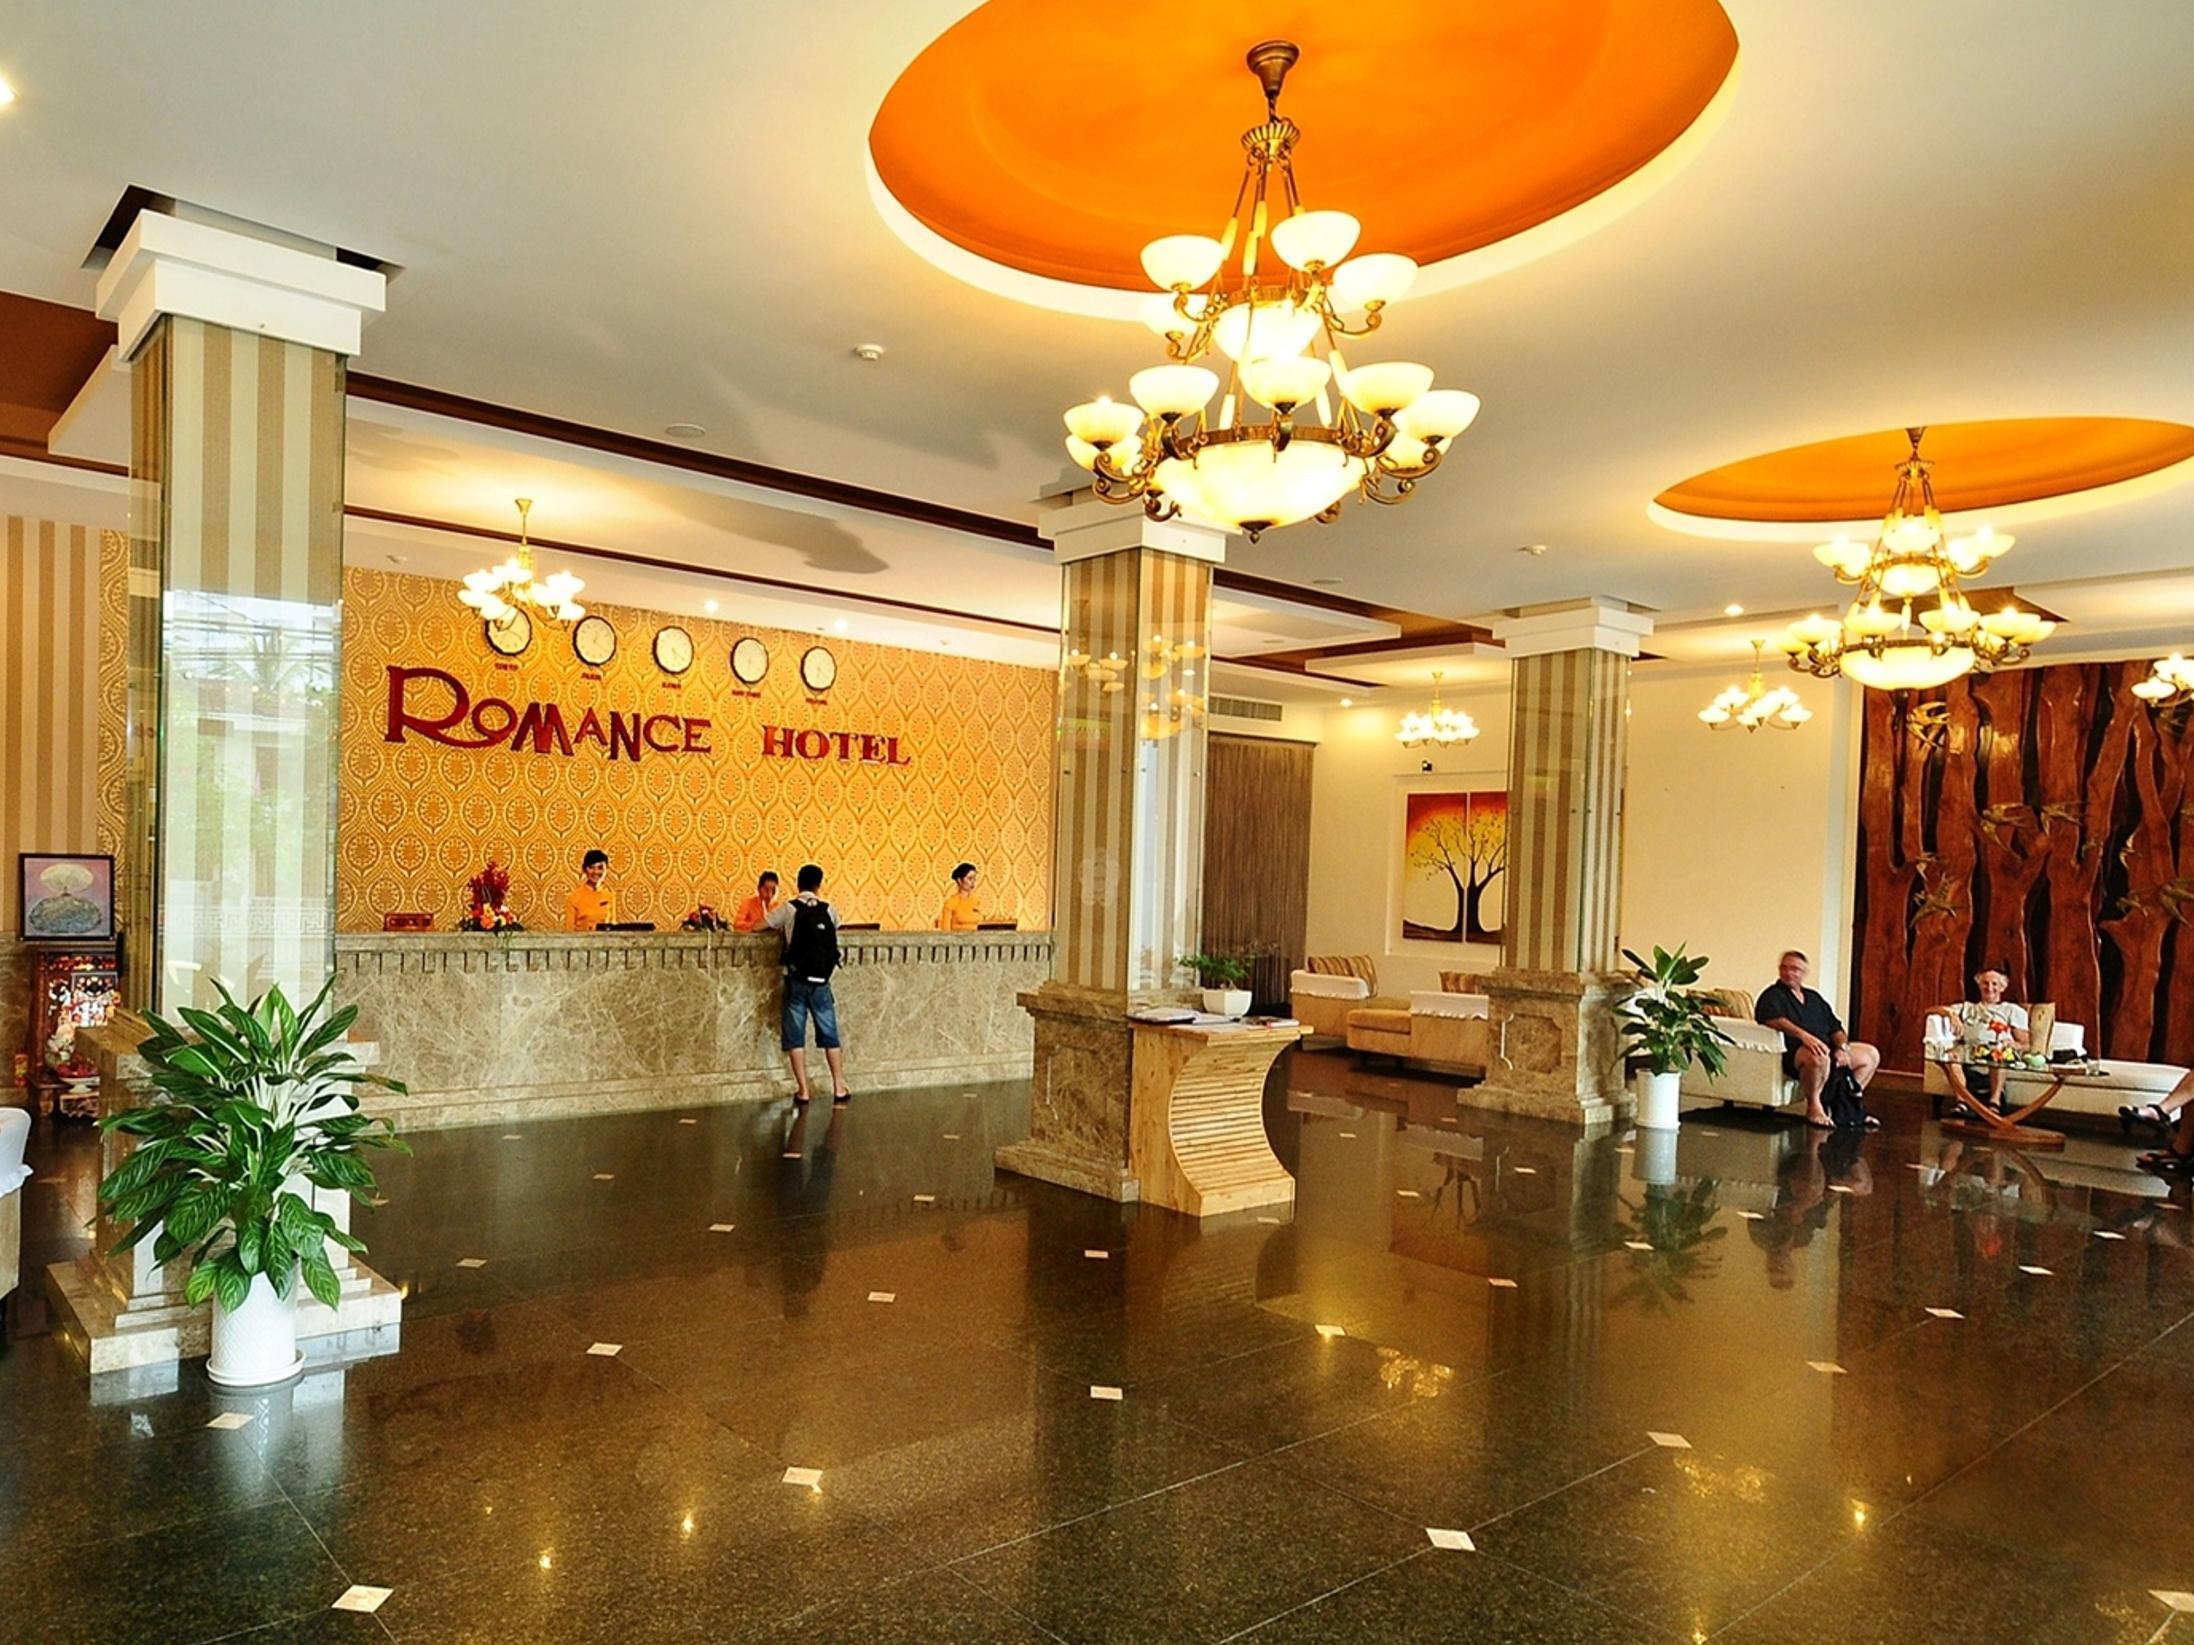 Romance Hotel Shueili Township FAQ 2016, What facilities are there in Romance Hotel Shueili Township 2016, What Languages Spoken are Supported in Romance Hotel Shueili Township 2016, Which payment cards are accepted in Romance Hotel Shueili Township , Shueili Township Romance Hotel room facilities and services Q&A 2016, Shueili Township Romance Hotel online booking services 2016, Shueili Township Romance Hotel address 2016, Shueili Township Romance Hotel telephone number 2016,Shueili Township Romance Hotel map 2016, Shueili Township Romance Hotel traffic guide 2016, how to go Shueili Township Romance Hotel, Shueili Township Romance Hotel booking online 2016, Shueili Township Romance Hotel room types 2016.